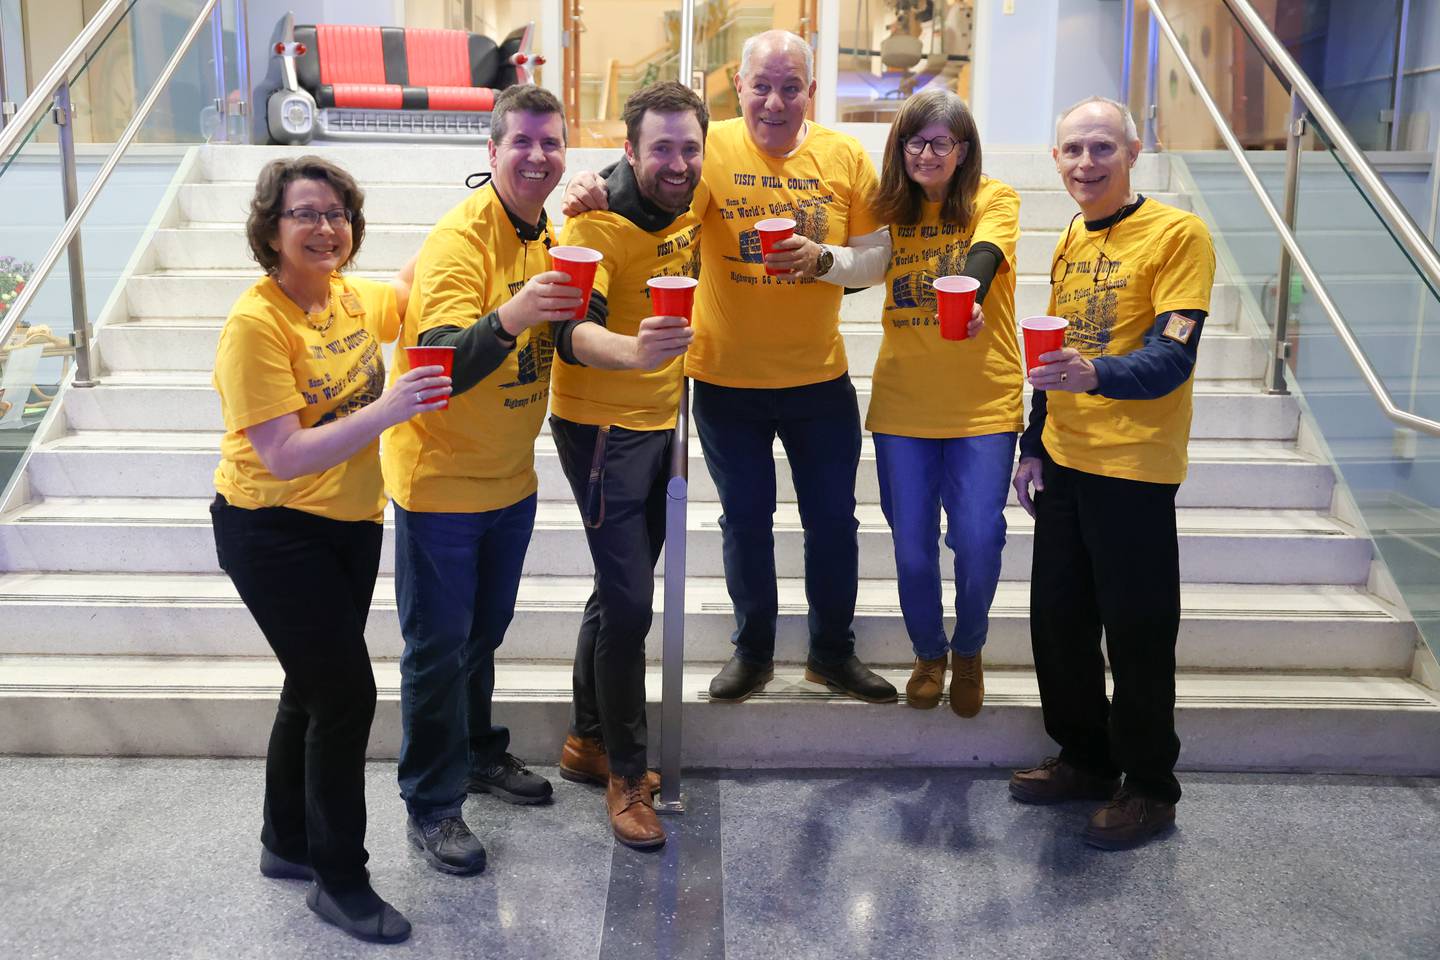 Volunteers pose for a photo during a kegger fundraiser to save the old Will County Courthouse at the Joliet Area Historical Museum on Friday, February 3rd.